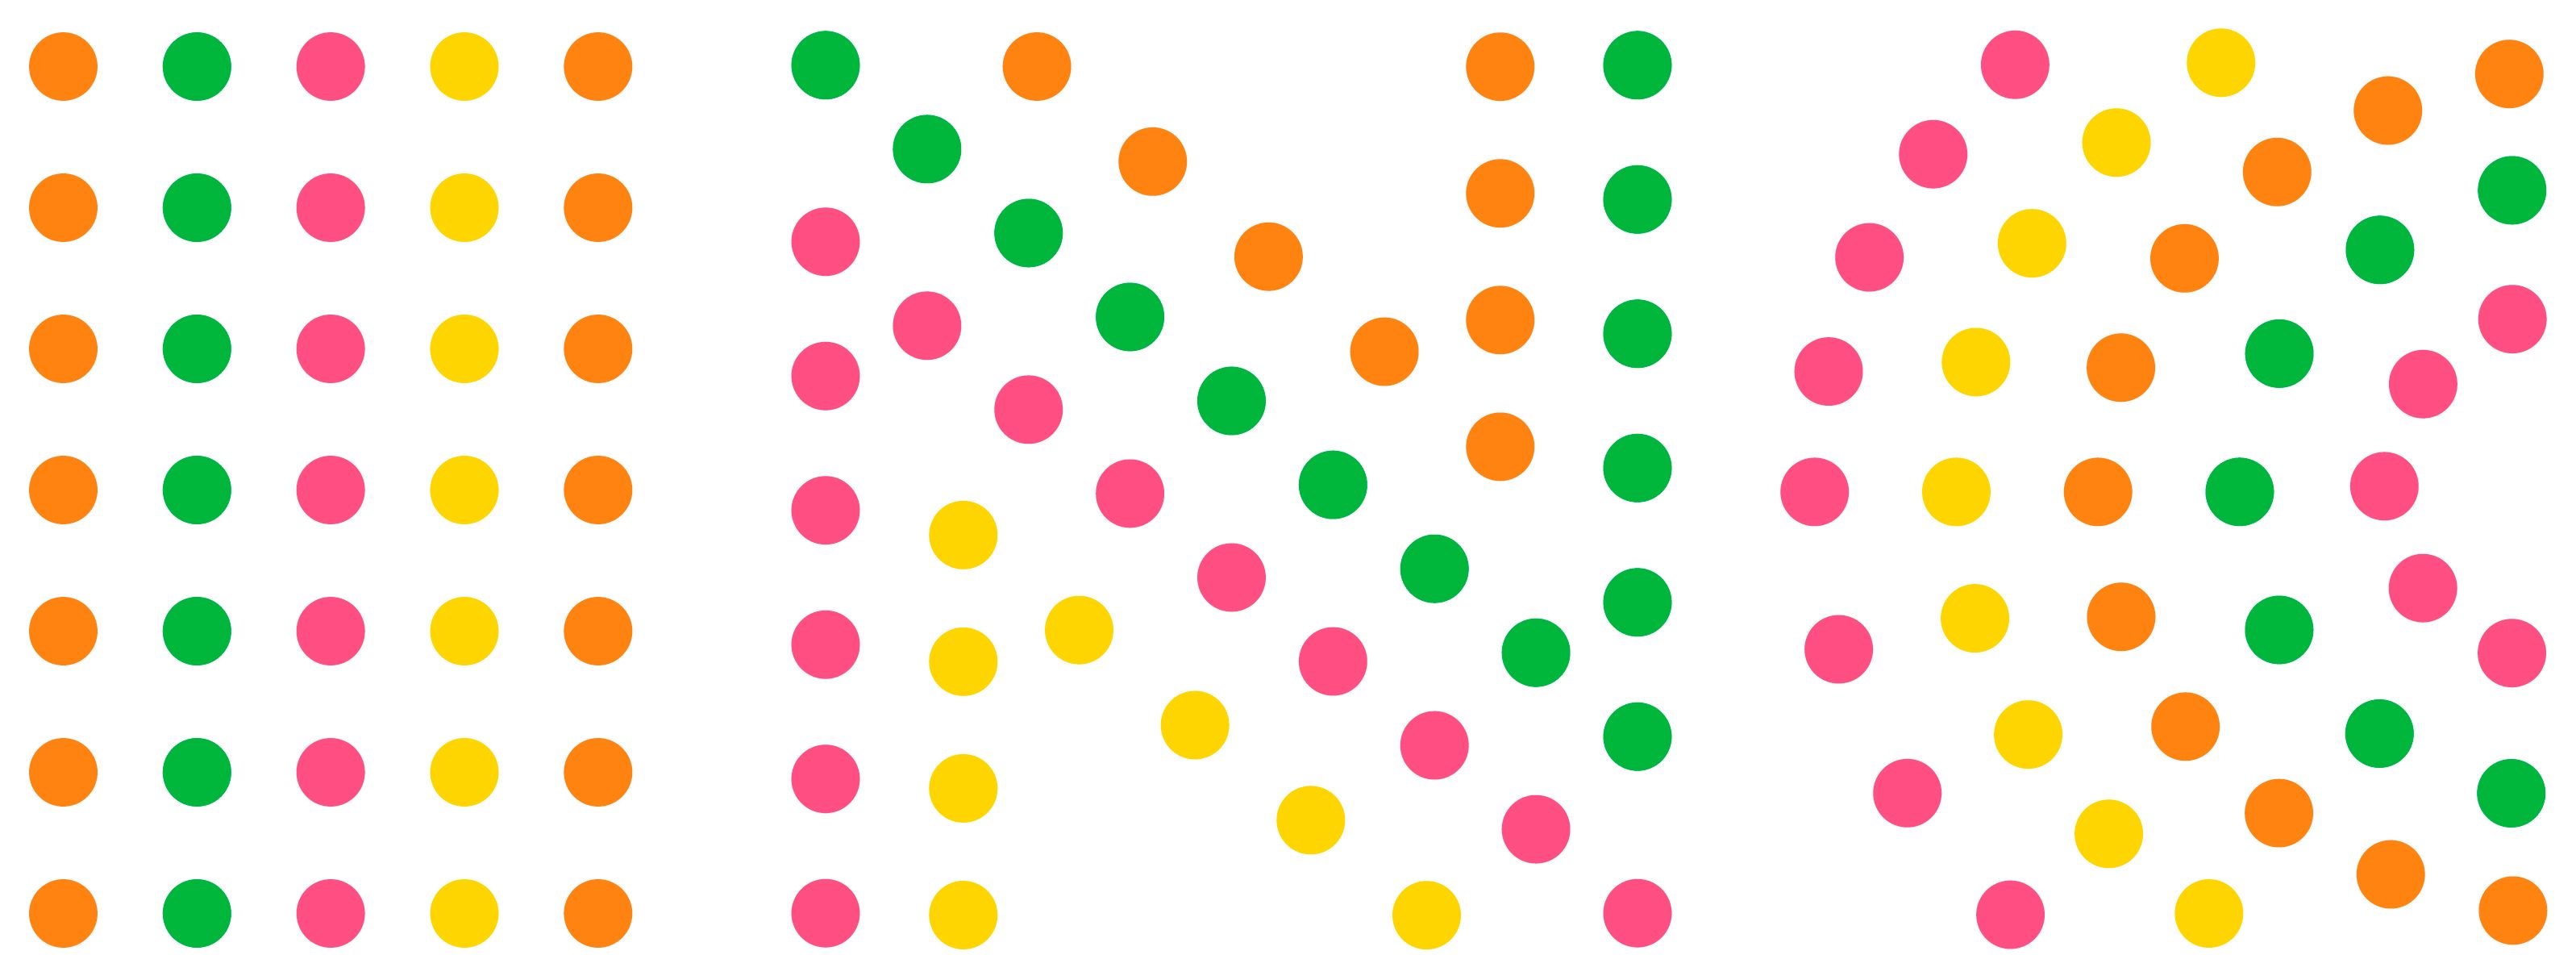 You can see the event poster for "In C". Colorful dots that represent "In C" in their arrangement.